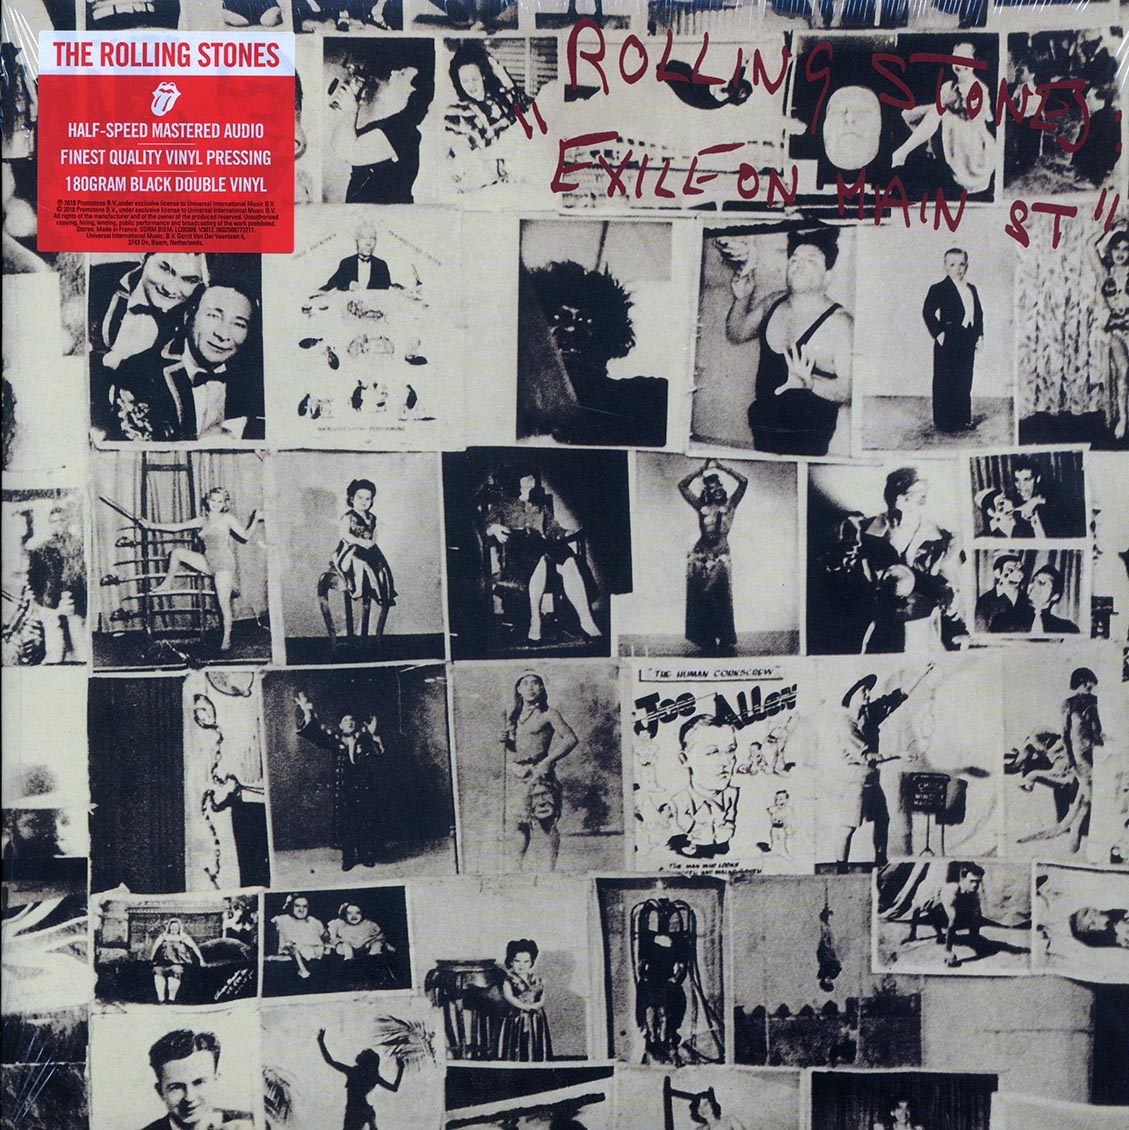 The Rolling Stones - Exile On Main St. (2xLP) (180g) (remastered) - Vinyl LP